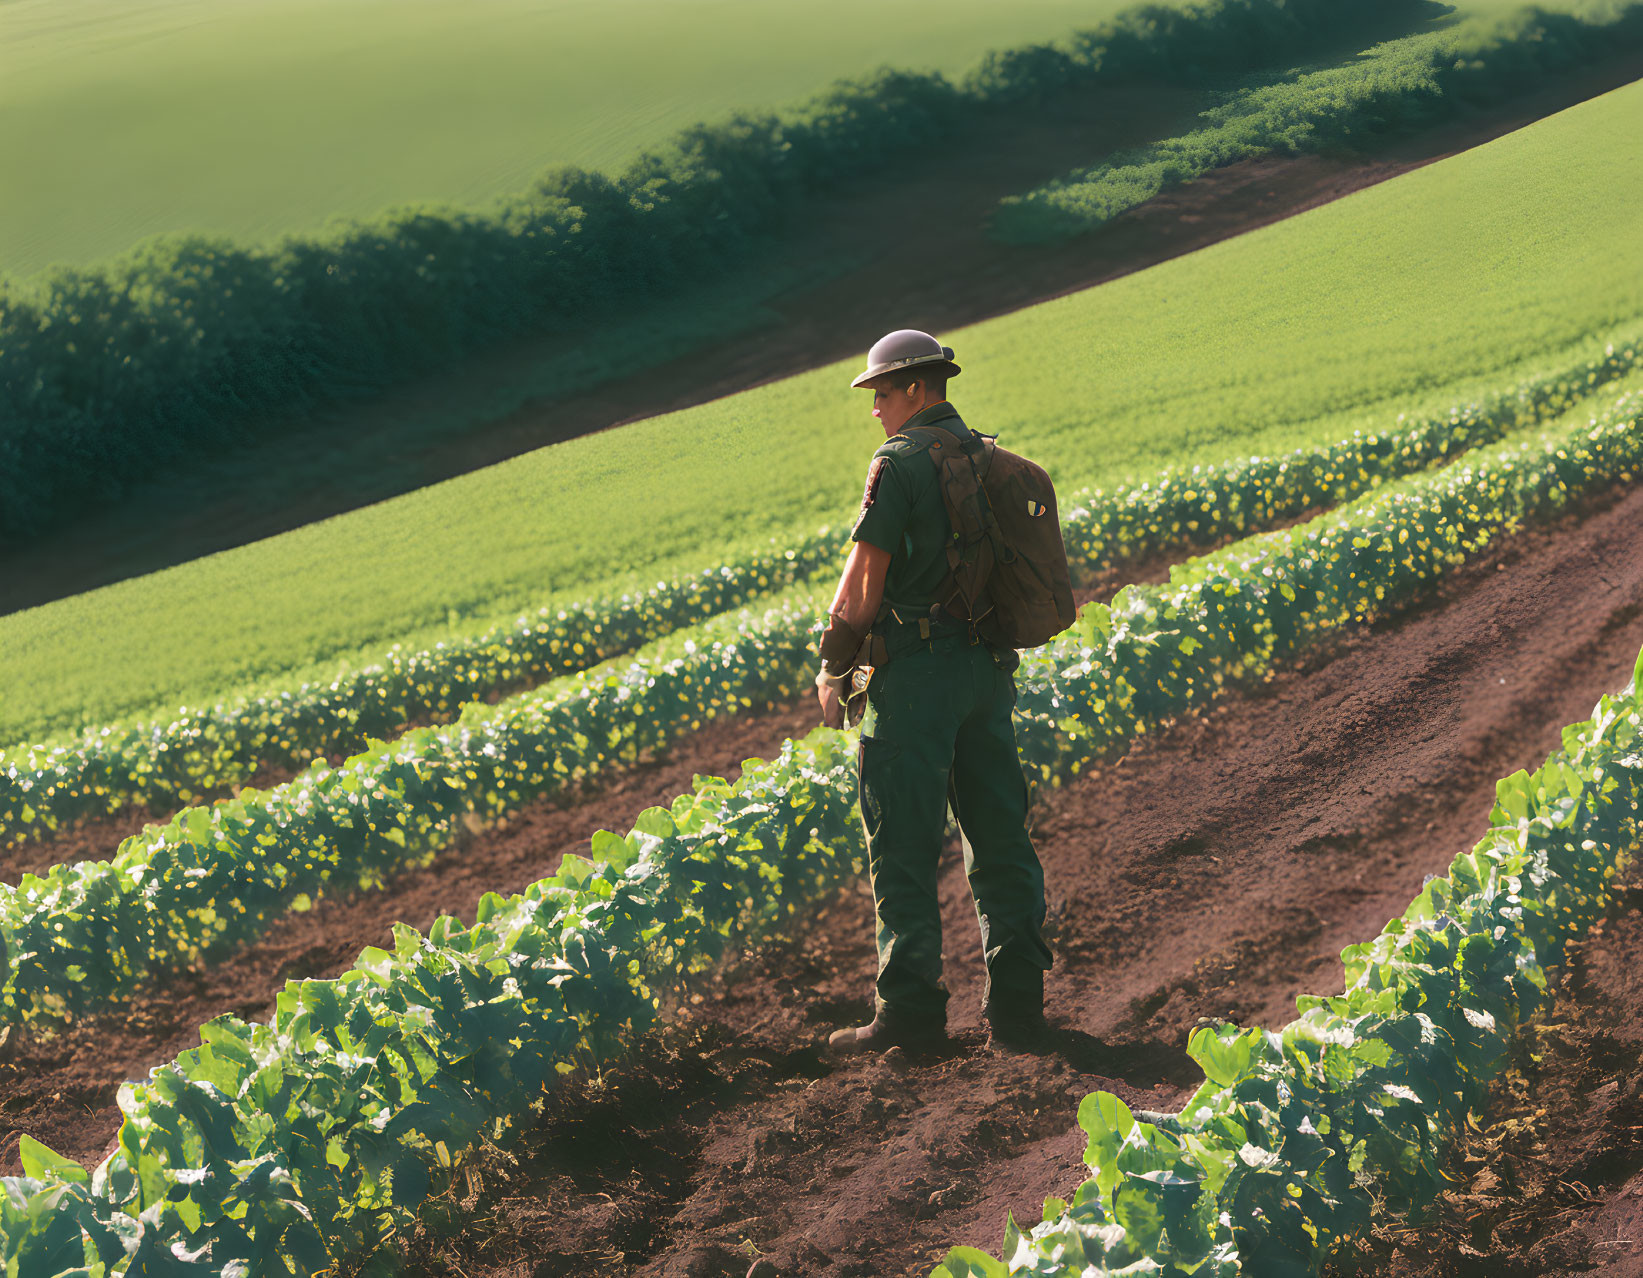 Person walking in hat and backpack through lush green field with rows of crops under warm sunlight